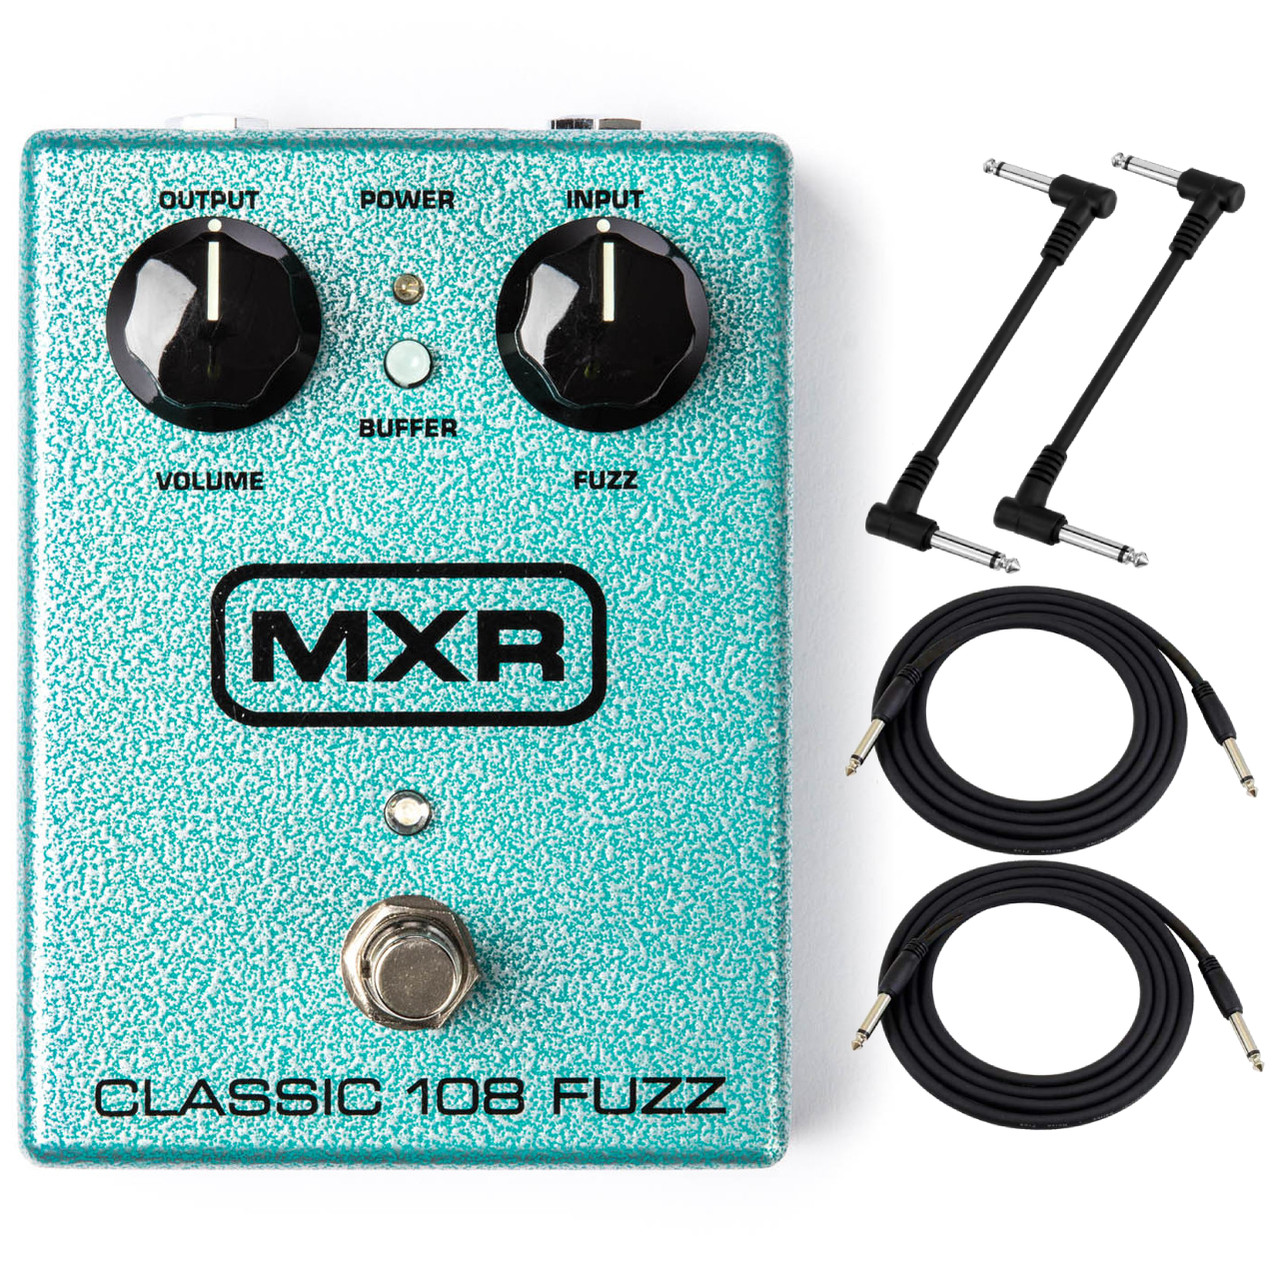 Dunlop MXR M173 Classic 108 Fuzz Effects Pedal with Cables